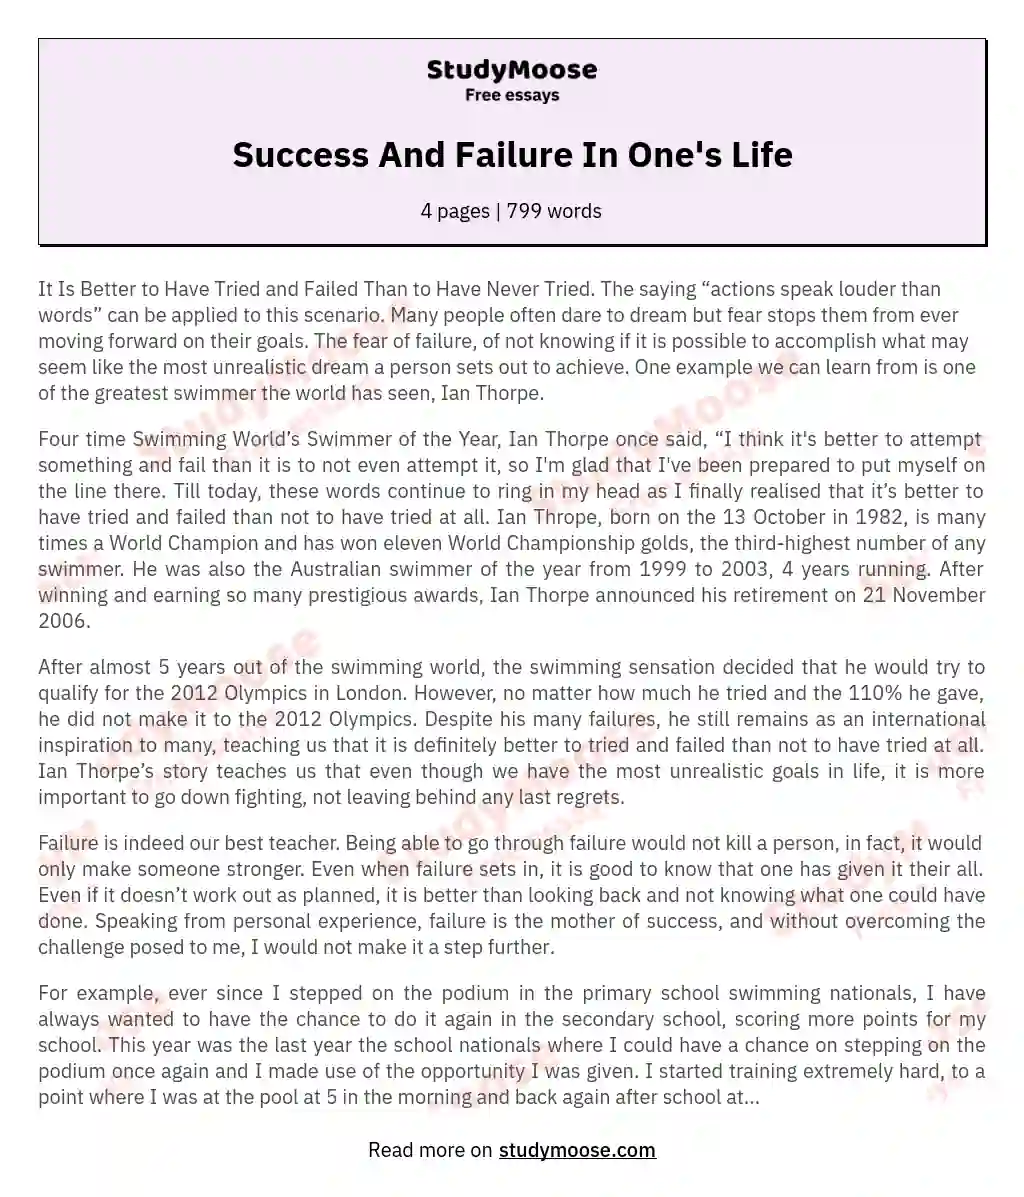 essay about failure to success